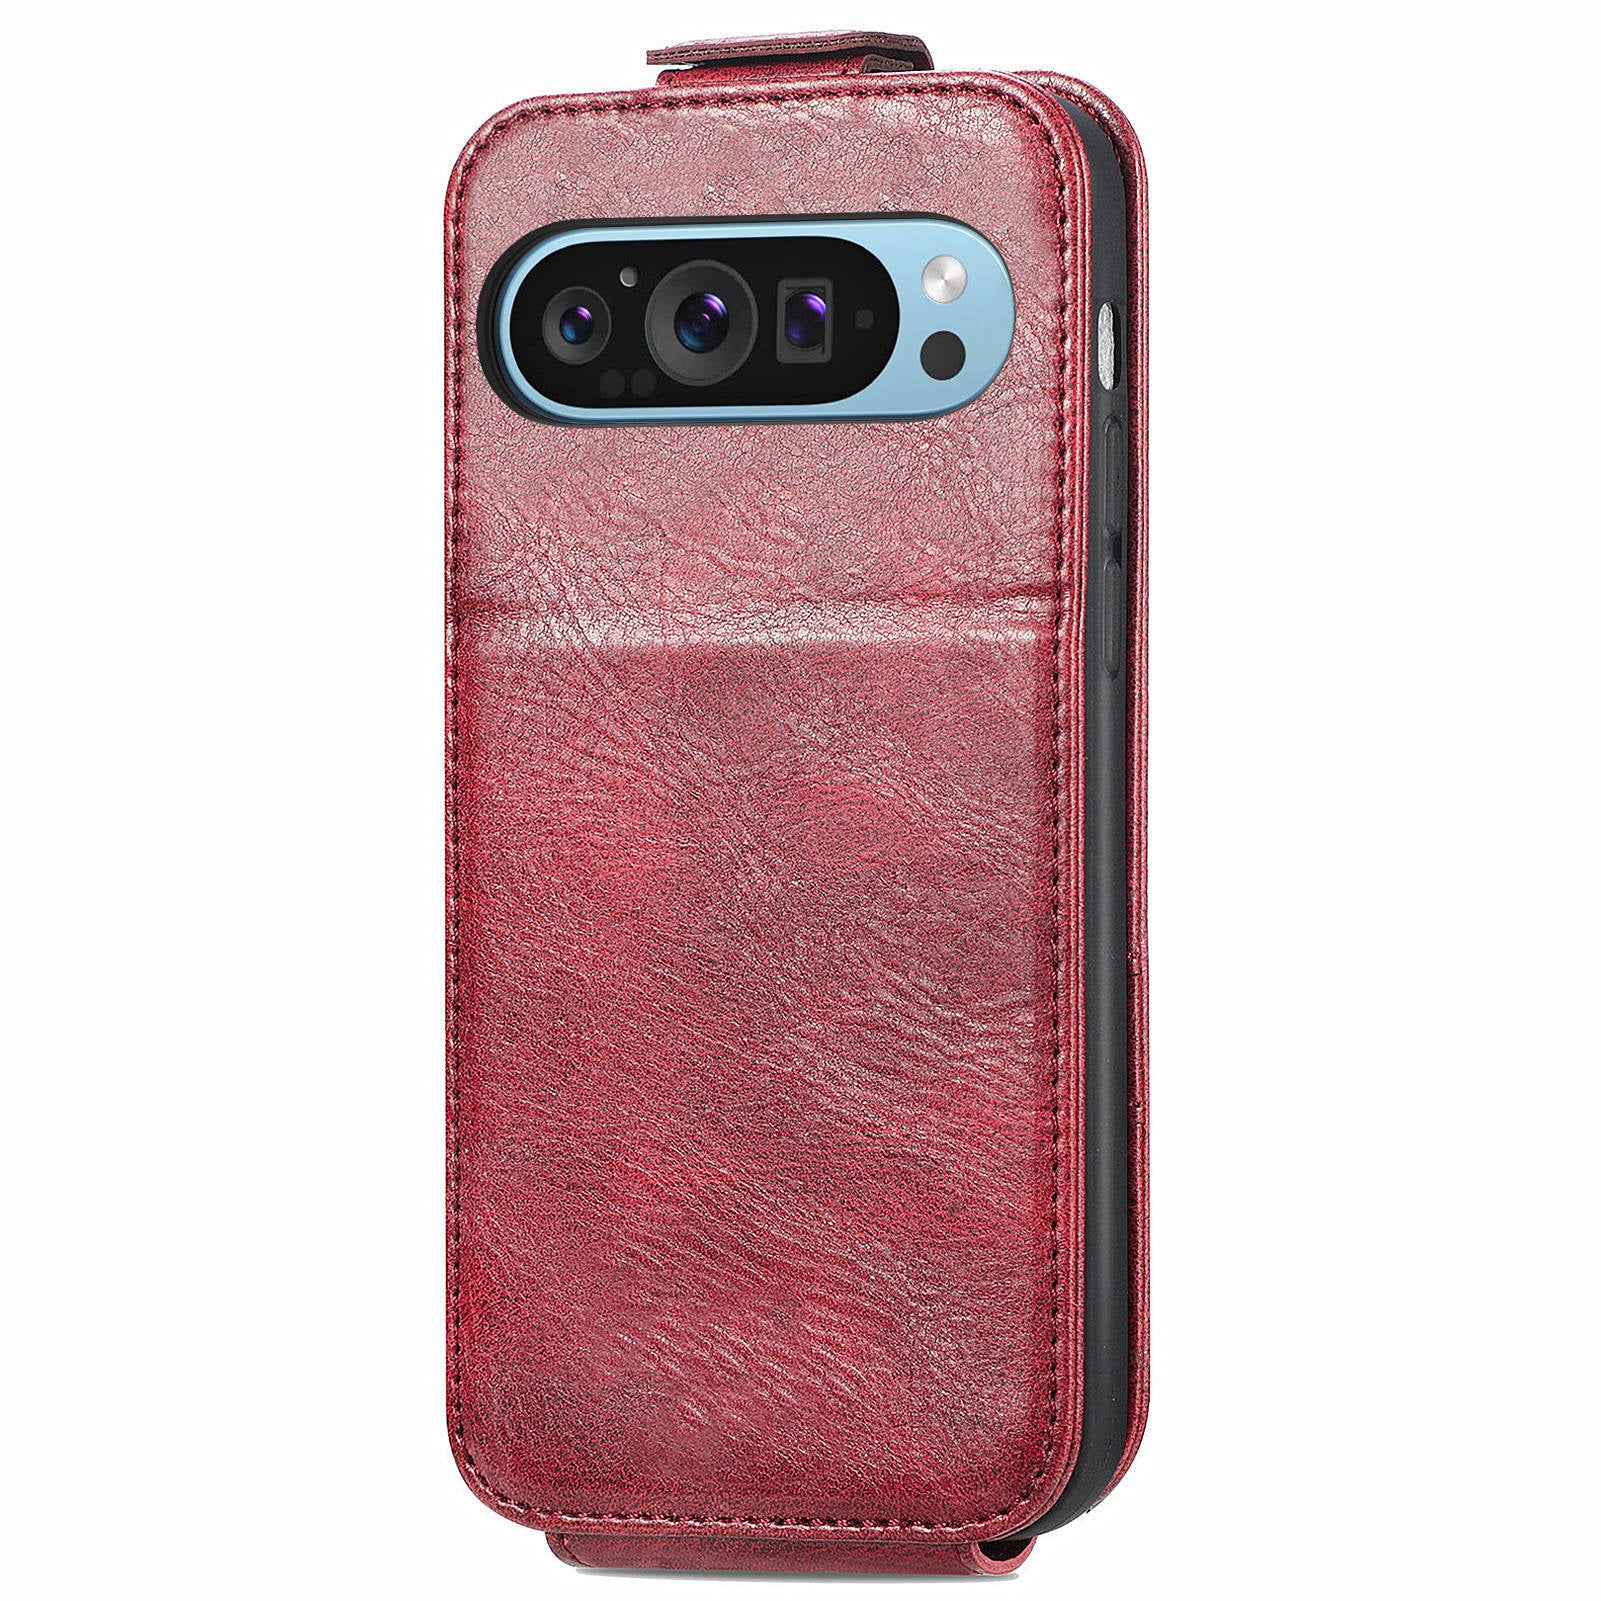 For Google Pixel 9 Pro Cell Phone Case Zipper Pocket Vertical Flip PU Leather Phone Stand Cover - Wine Red